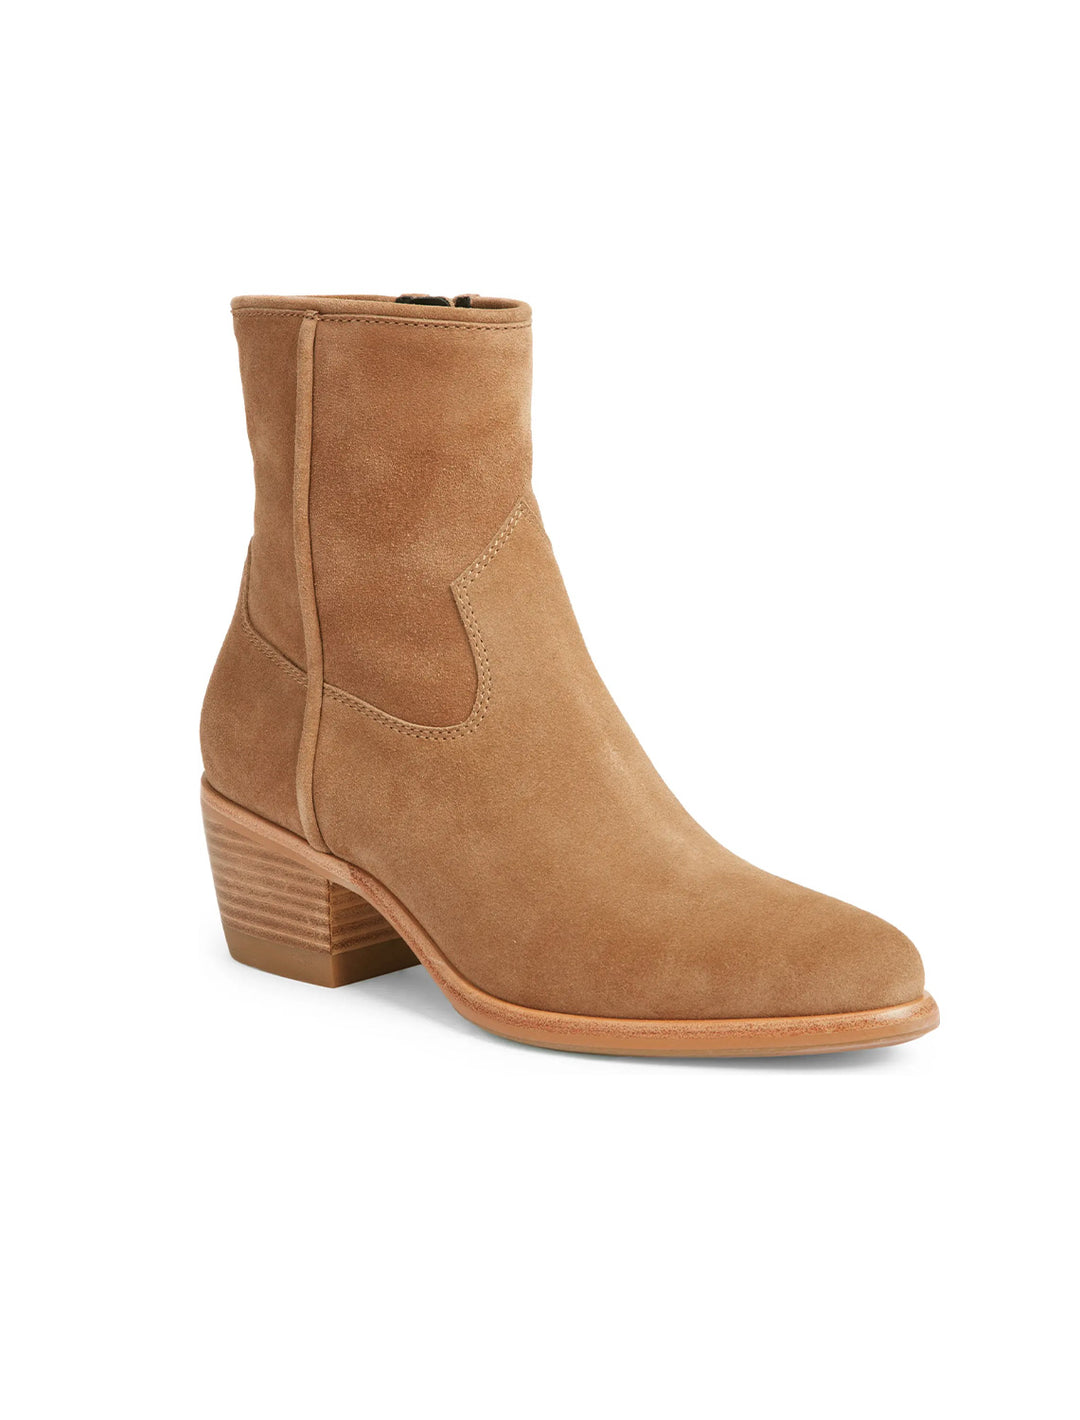 Front view of Rag & Bone's mustang boot in camel suede.